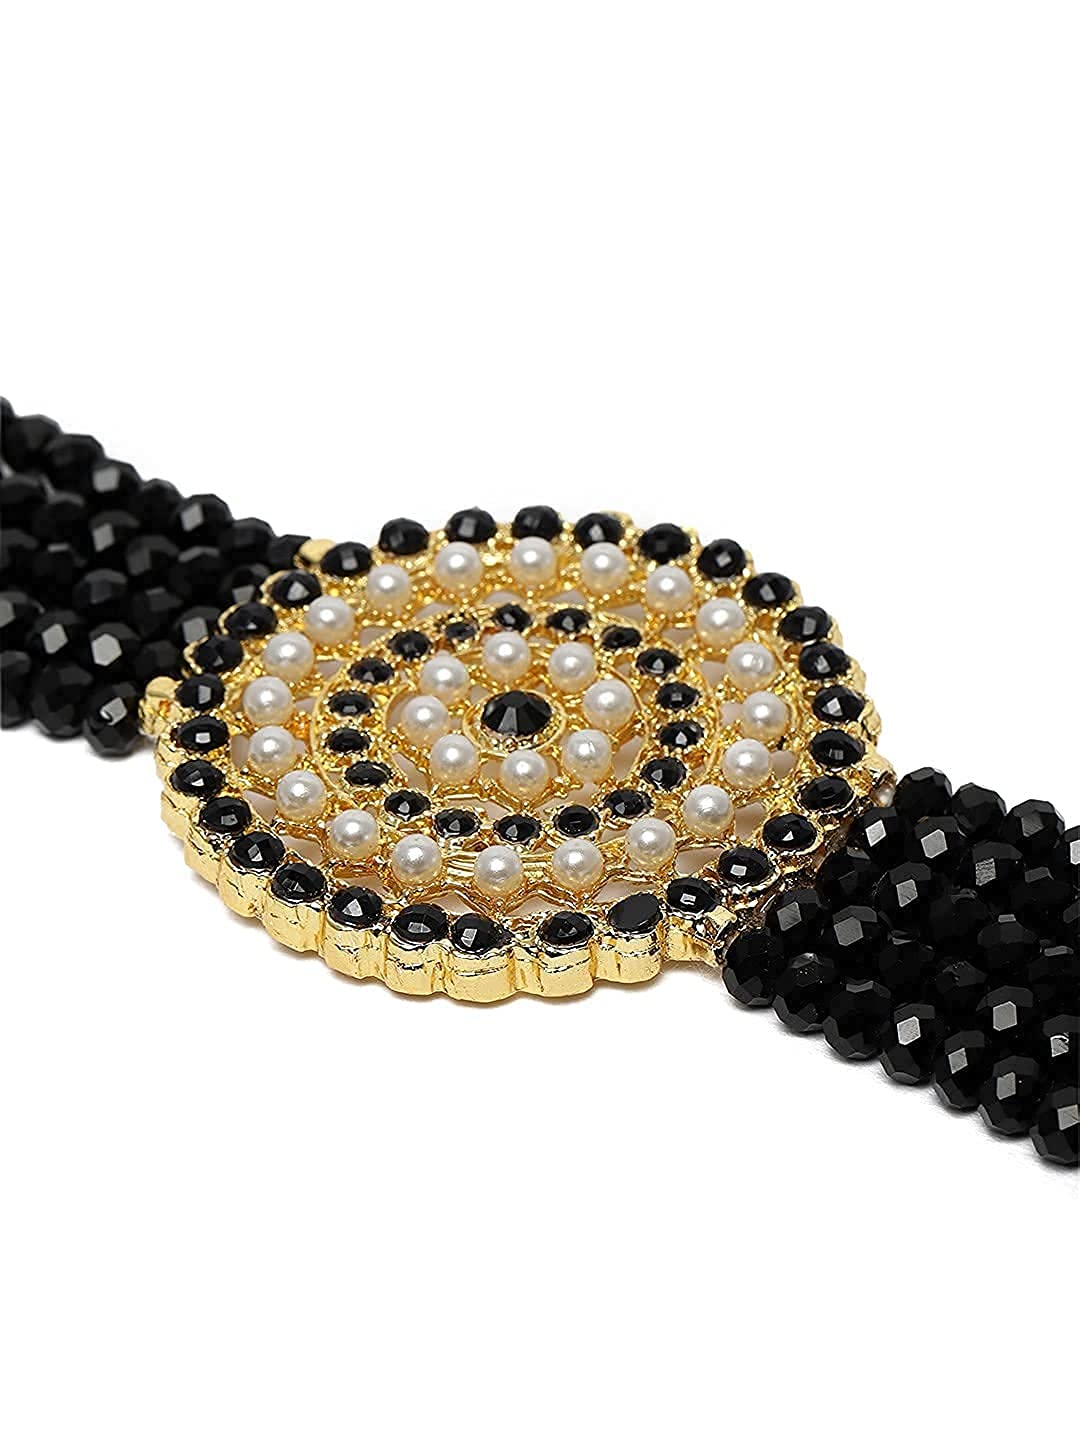 Women's Gold Plated Black & White Light Weight Crystal Stone Beaded Choker Necklace Jewellery Set - i jewels